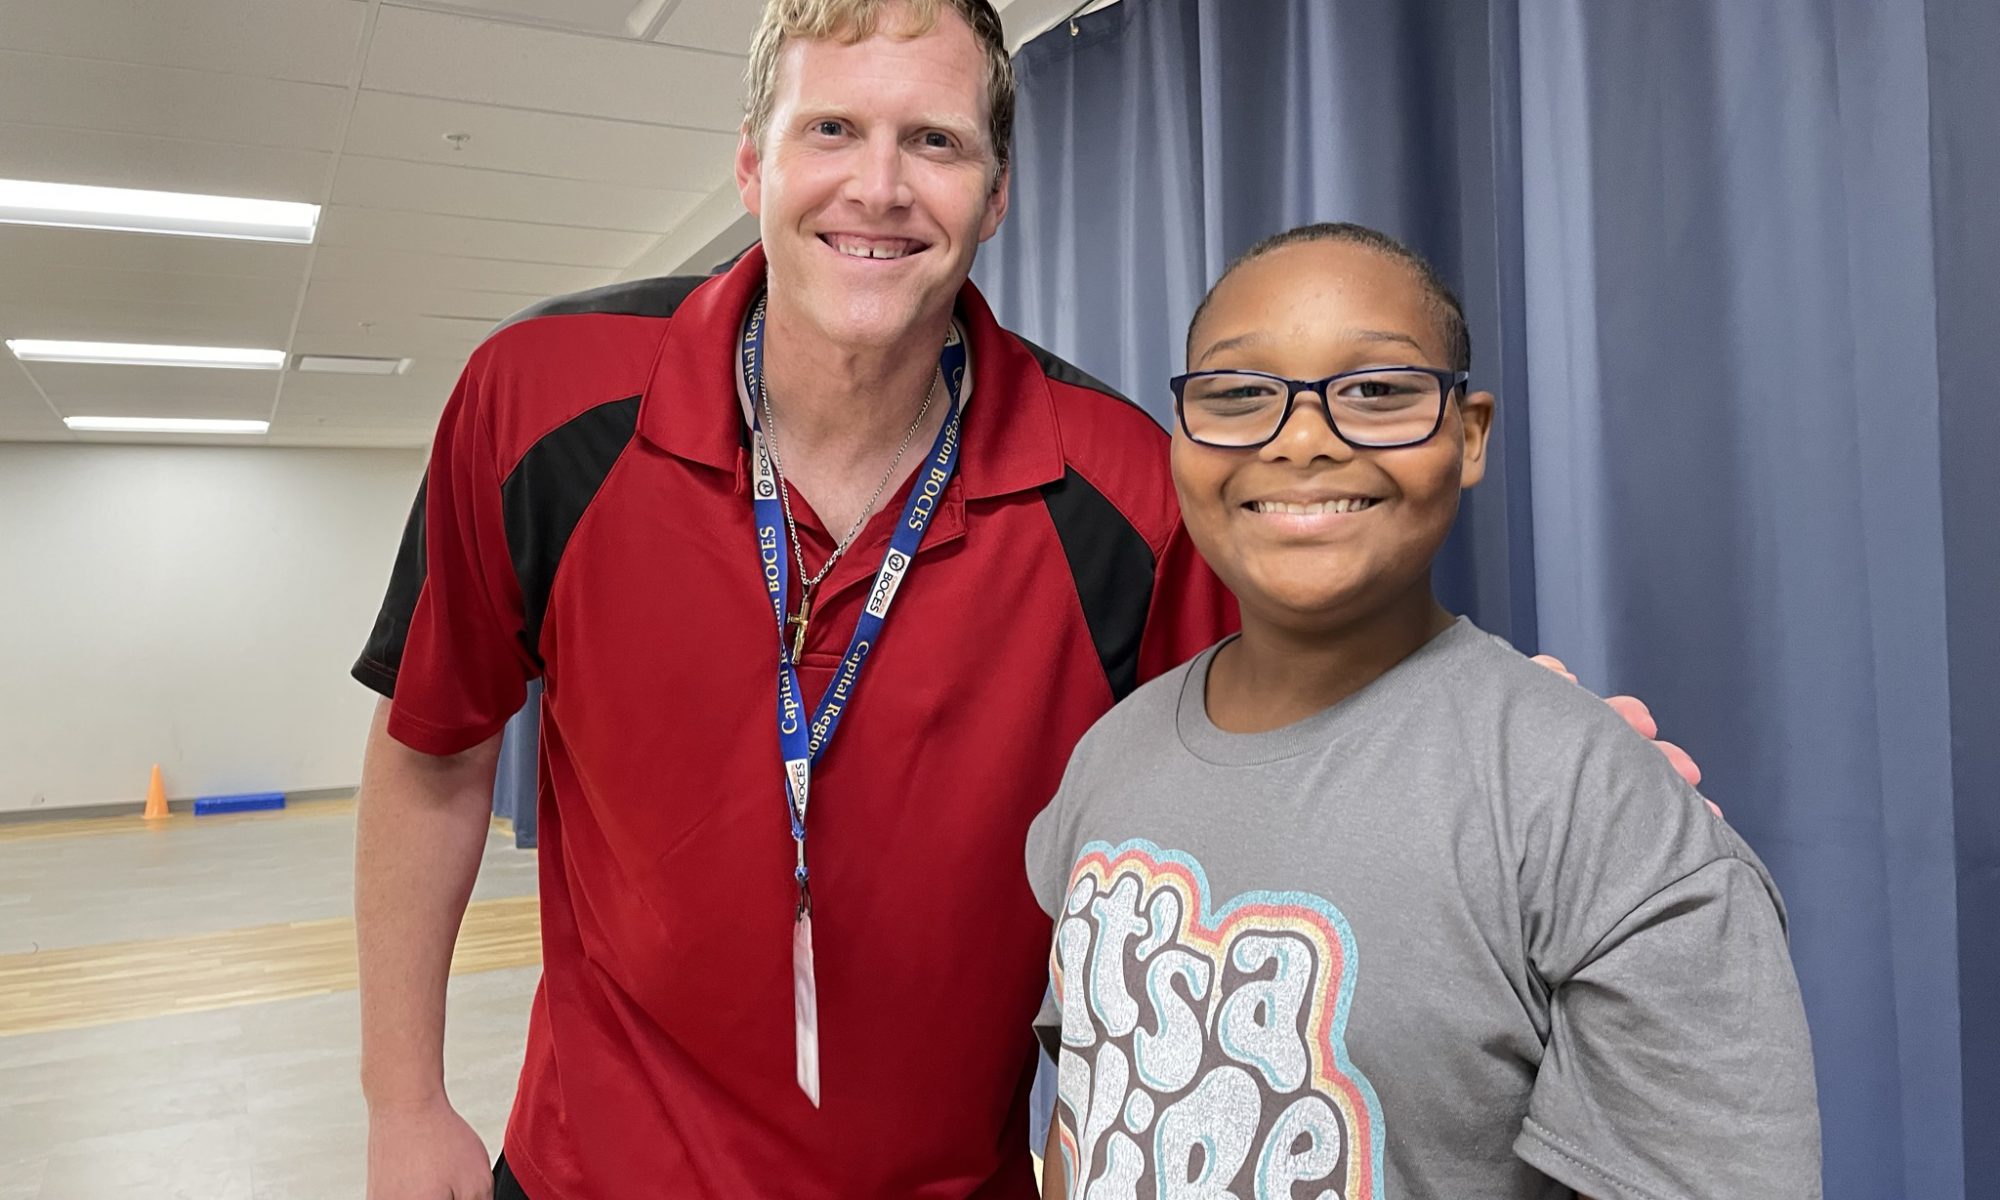 A staff member and student smiling. The staff member is wearing a red polo and the student is wearing a grey shirt that says "it's a vibe" in white letters.